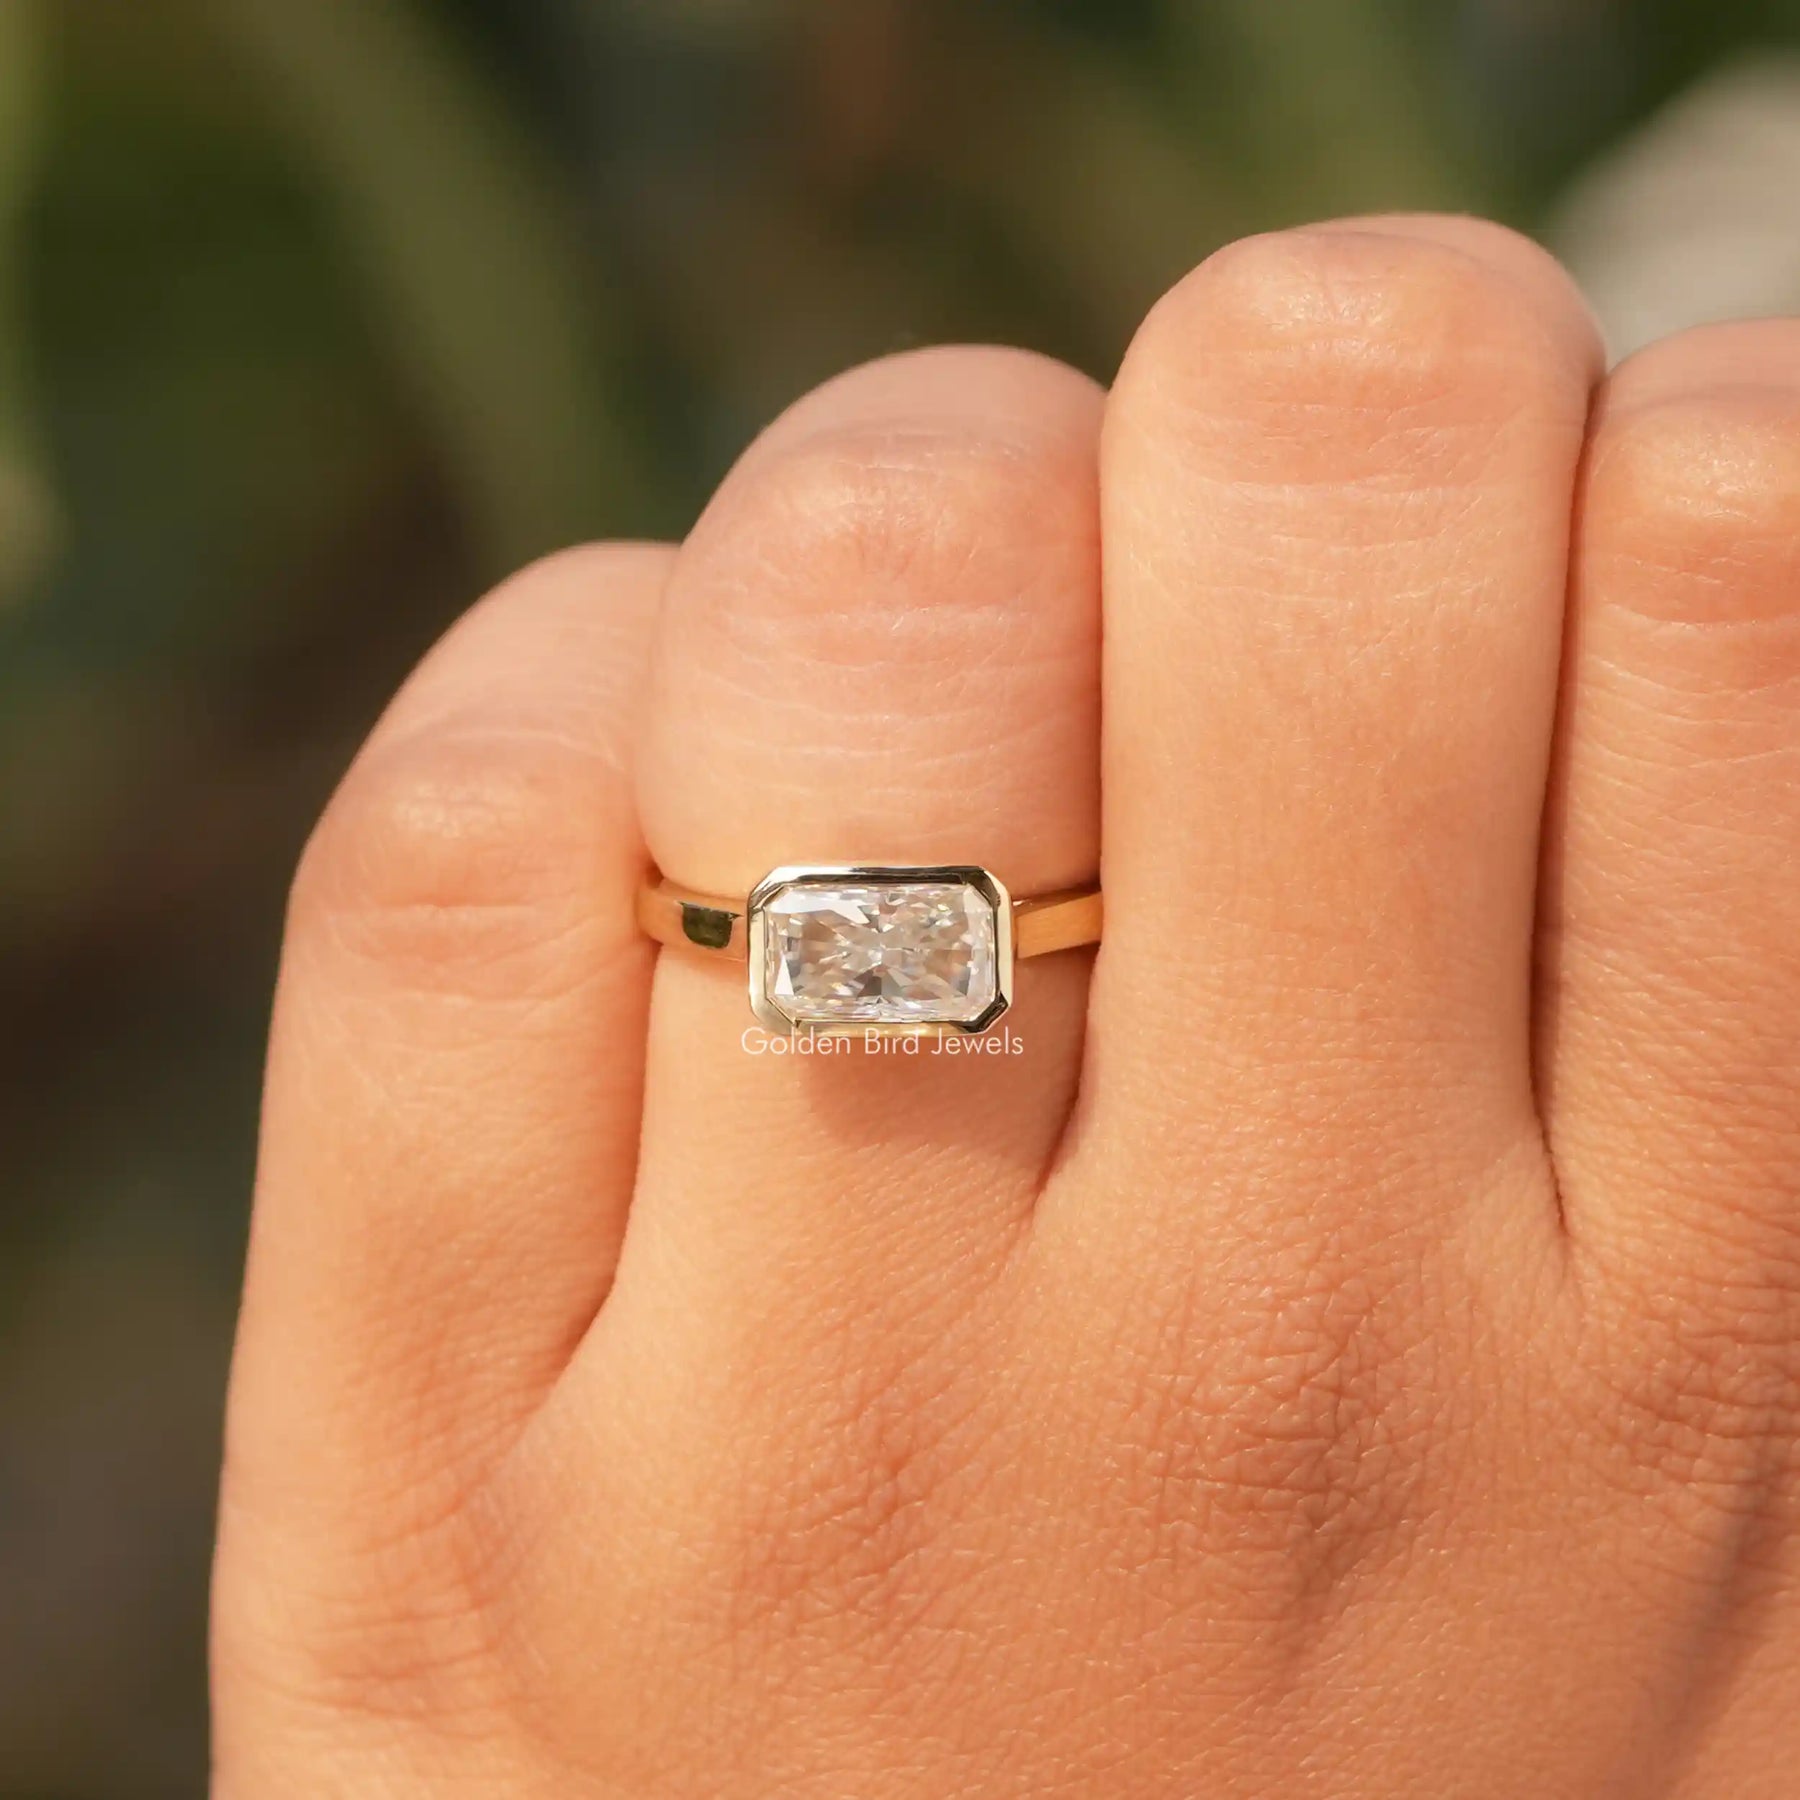 [Moissanite Radiant Cut Solitaire Ring]-[Golden Bird Jewels]